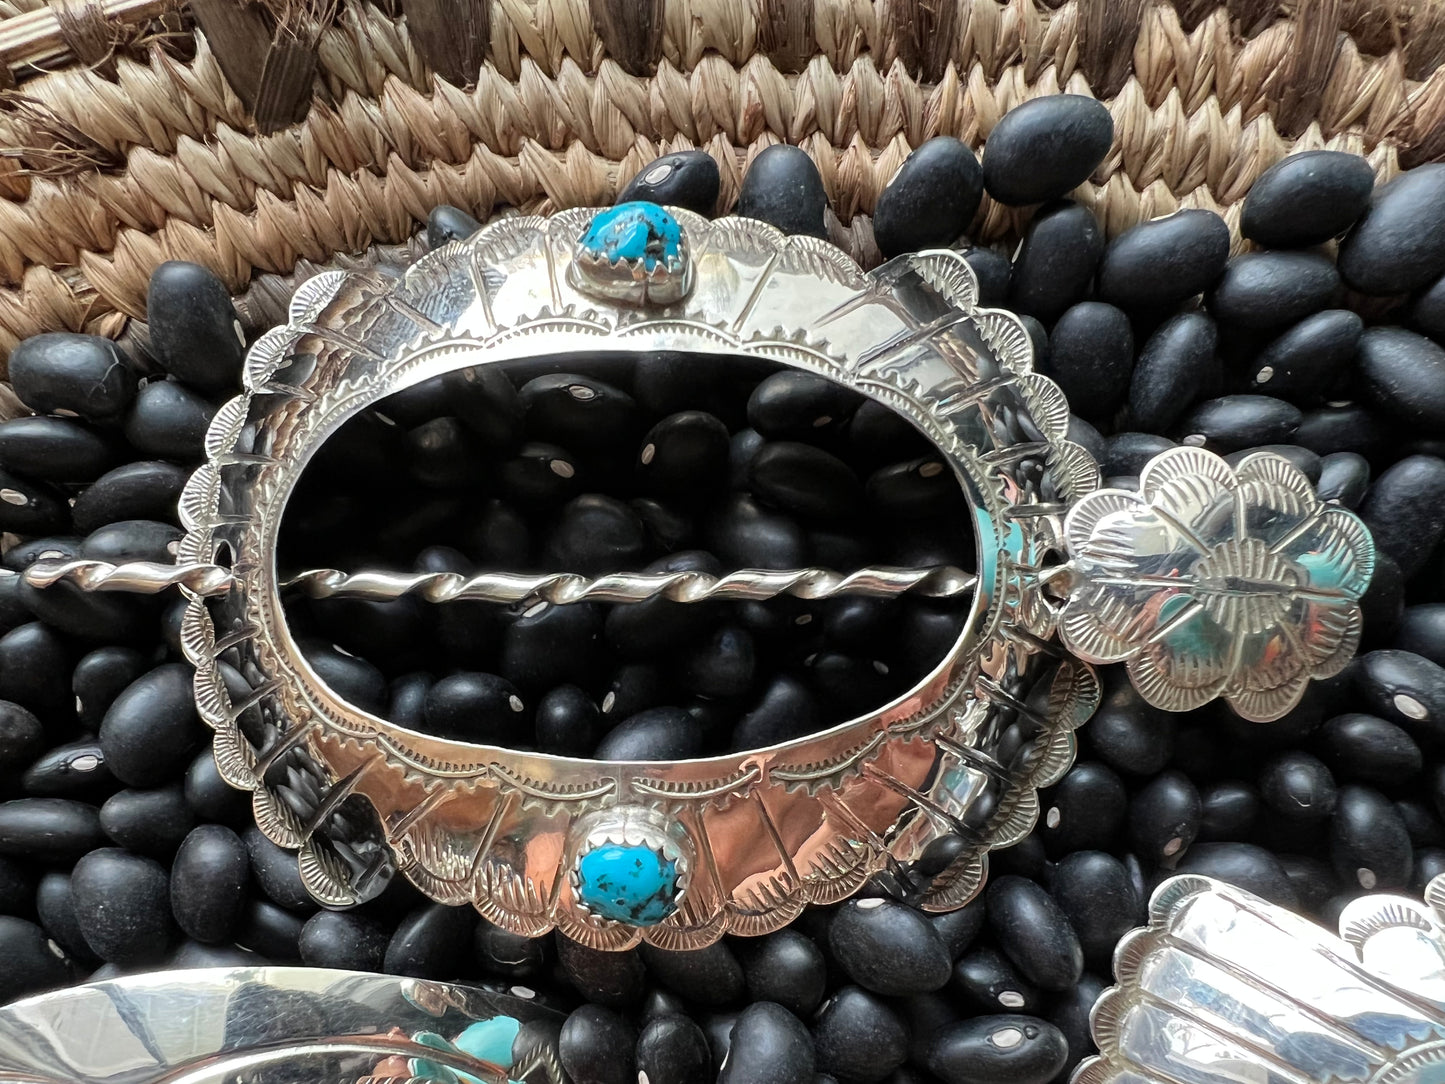 Native American sterling hair accessory